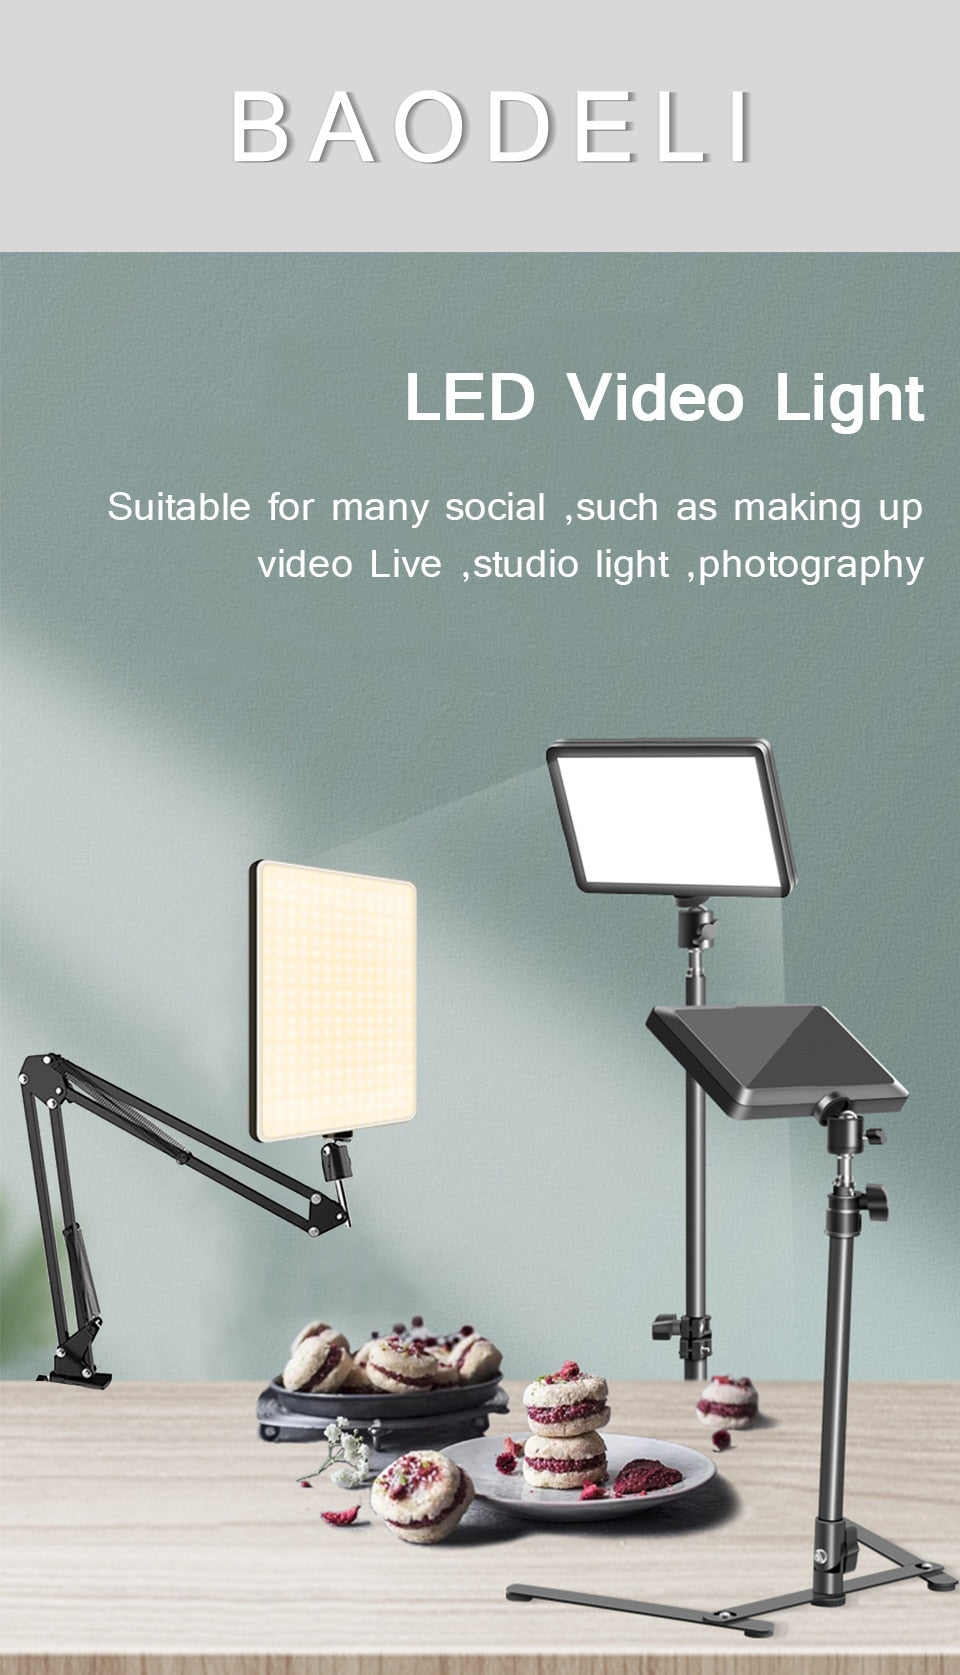 Bi-color LED Fill Lamp - Studio Light with Stand